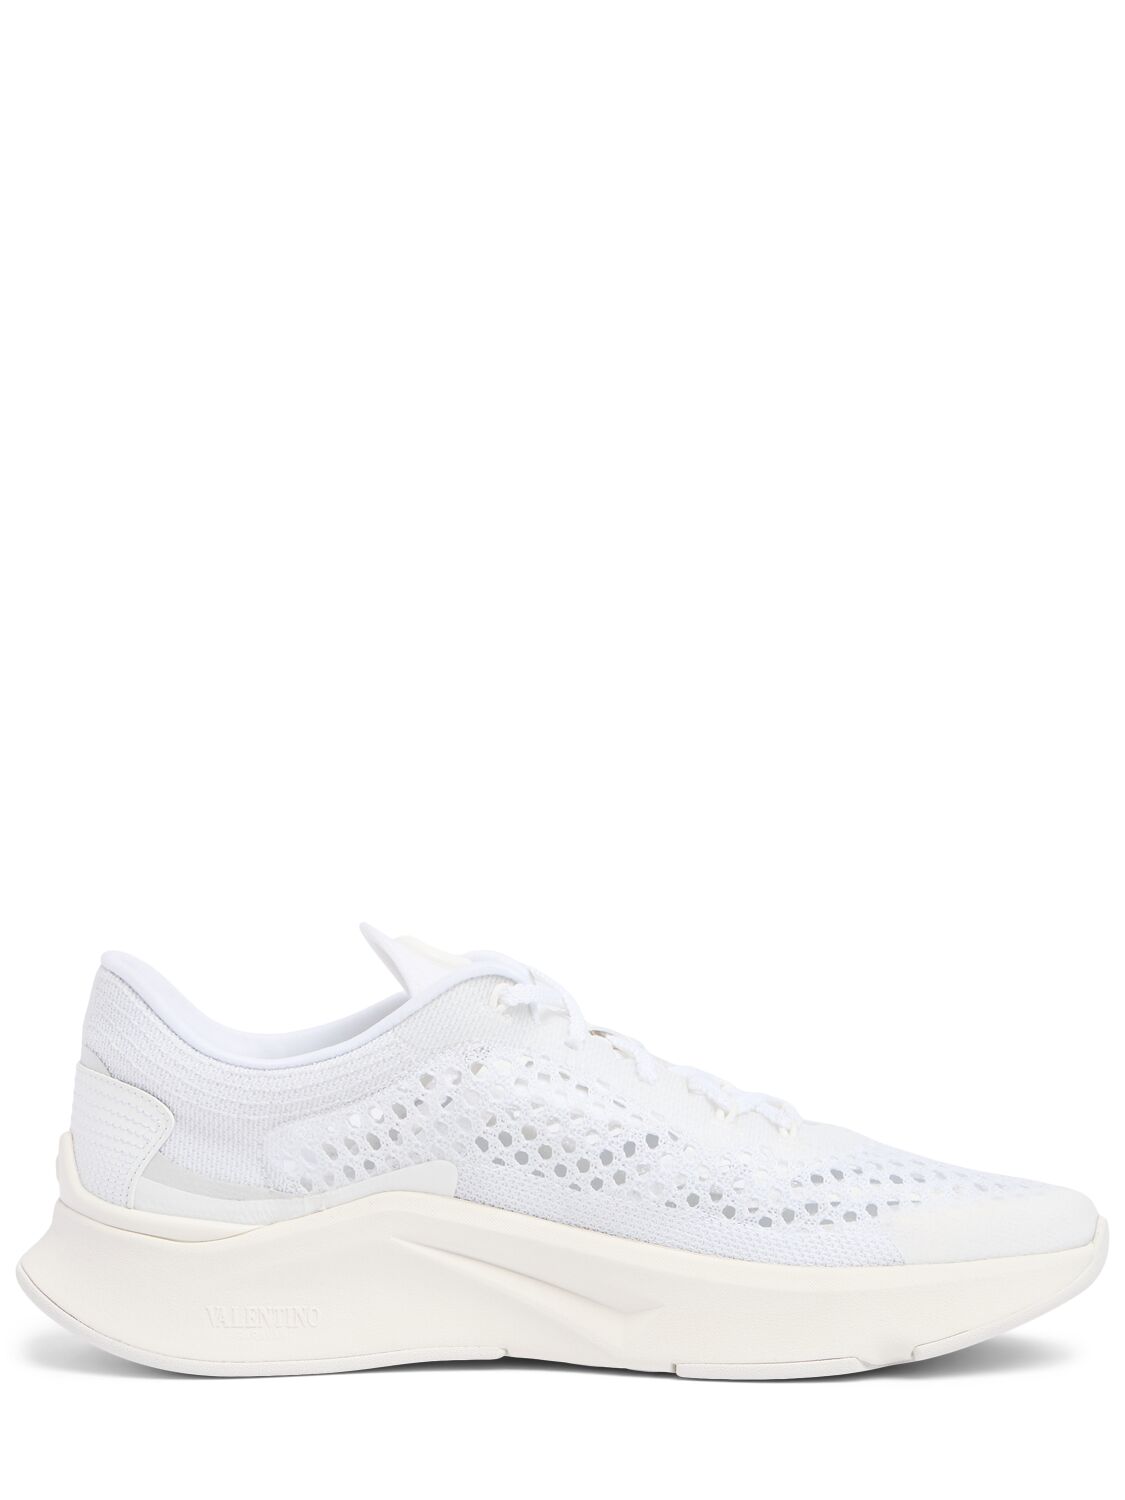 Act One Mesh Sneakers